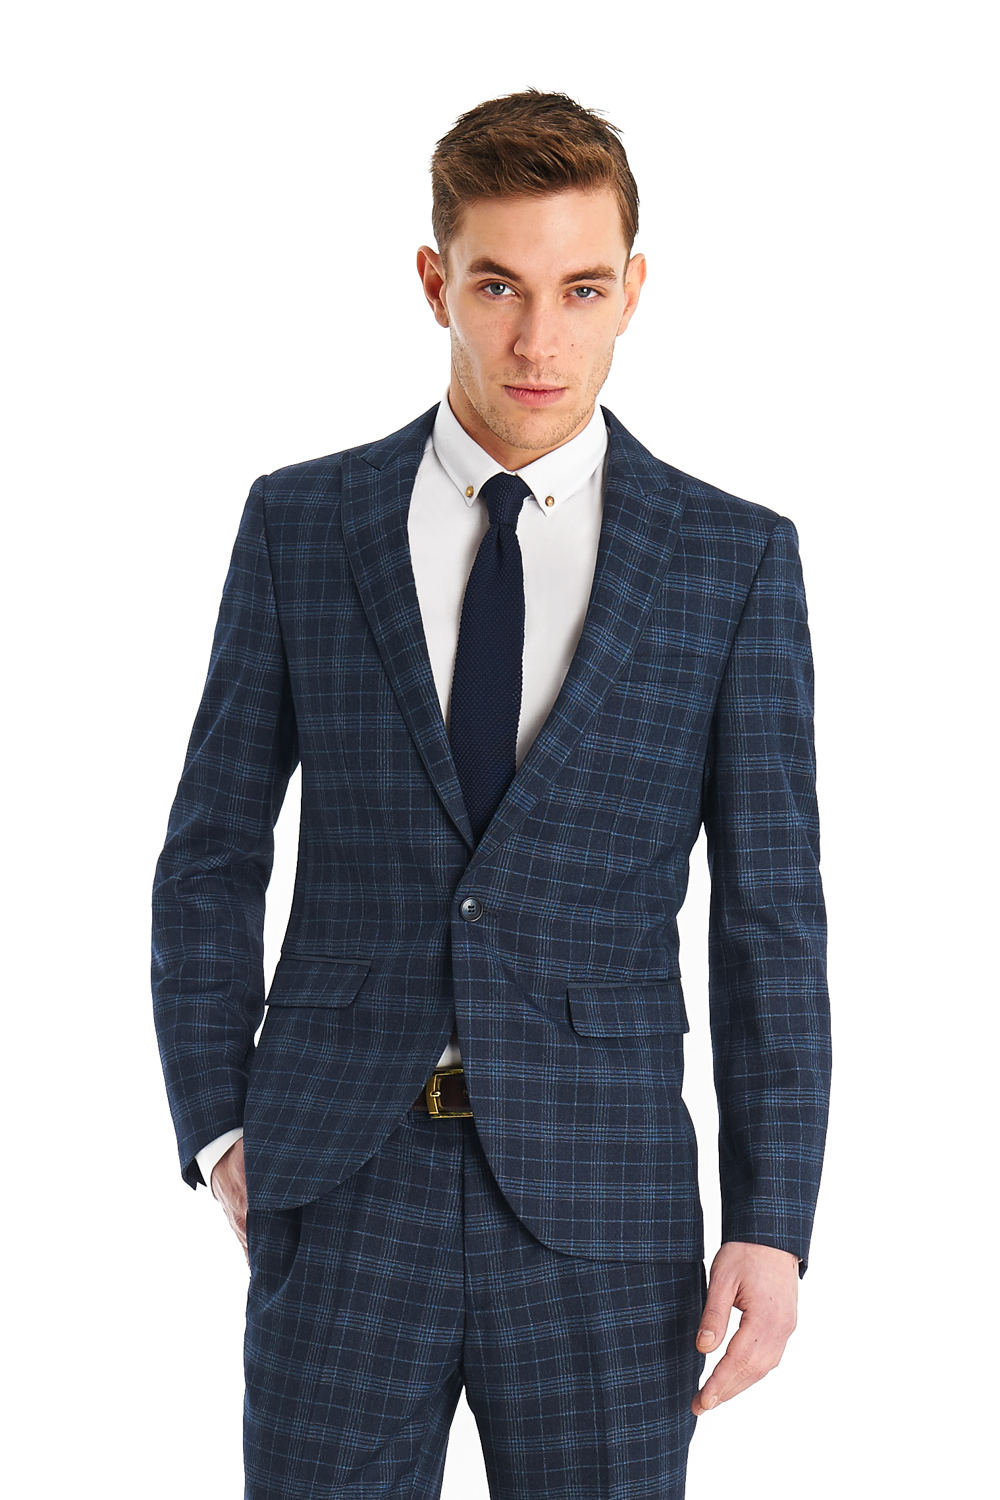 Advice on shirt and tie to wear with this suit